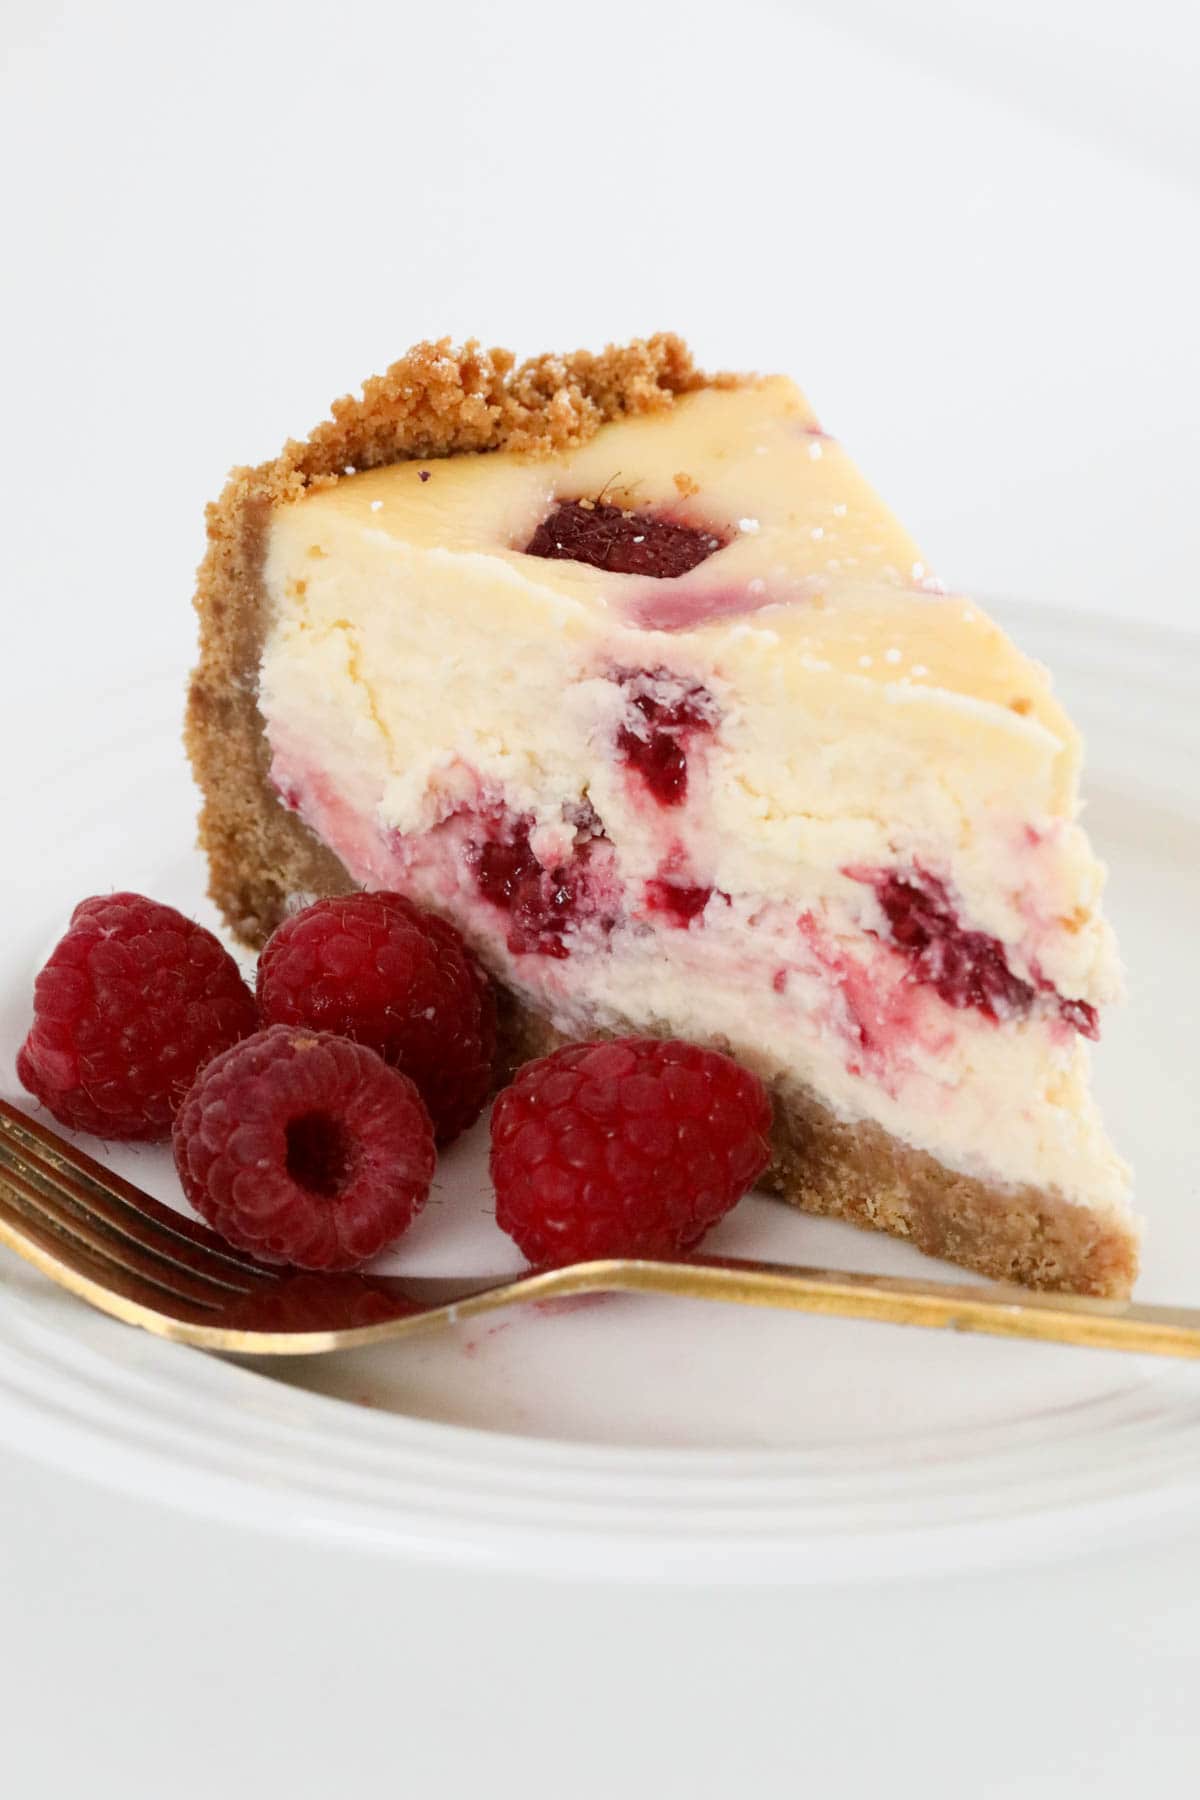 A serve of baked cheesecake with fresh raspberries and a gold fork placed beside it.